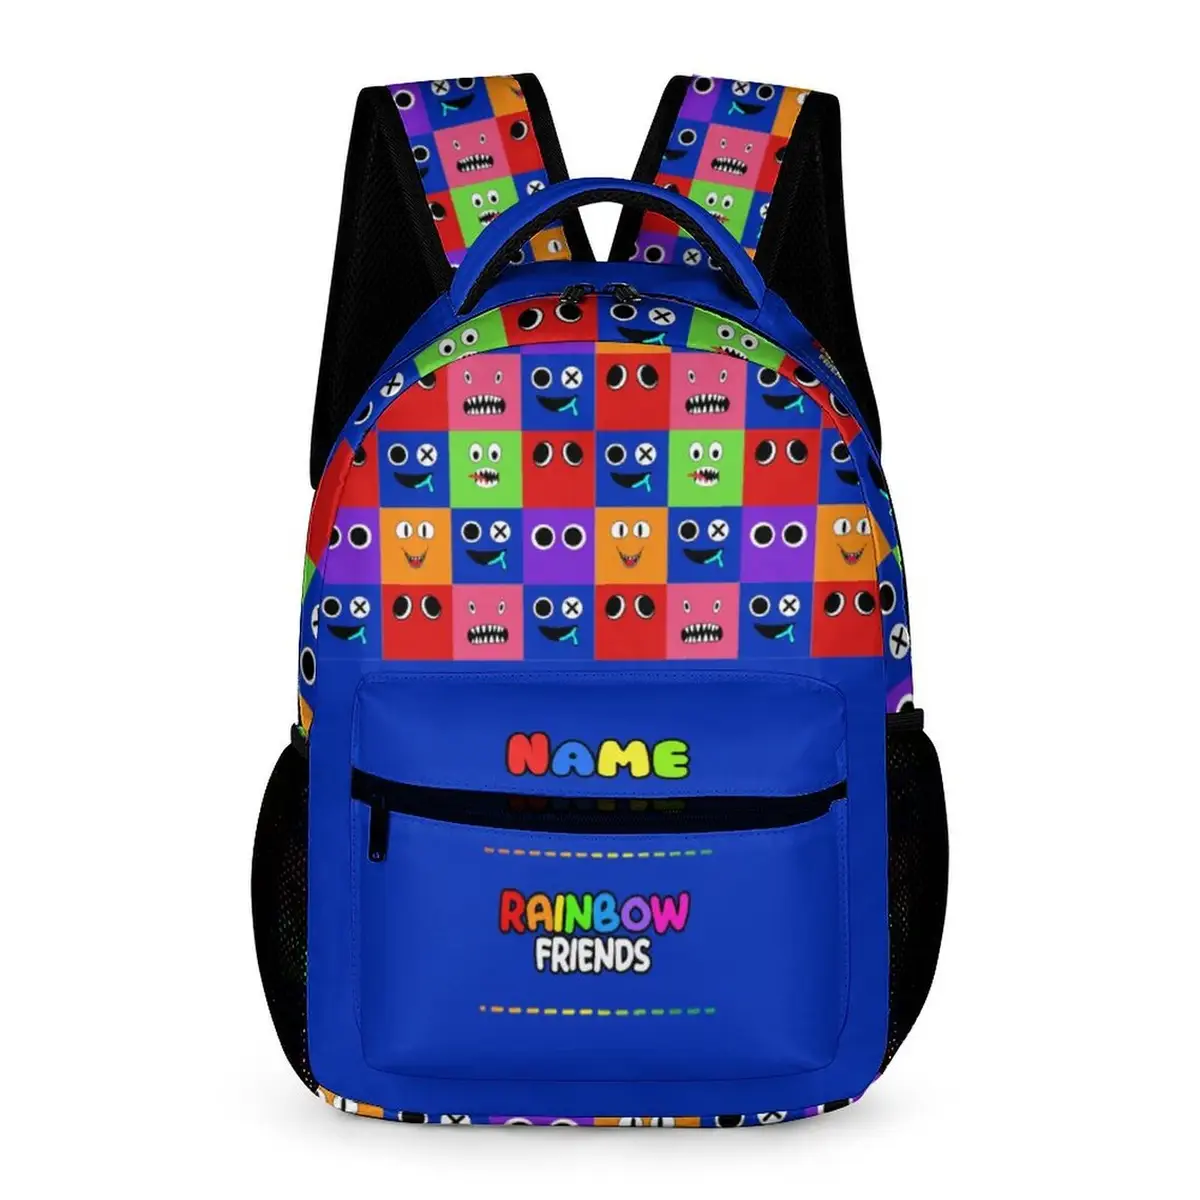 Blue Rainbow Friends backpack from BLUE grid characters faces background Cool Kiddo 10